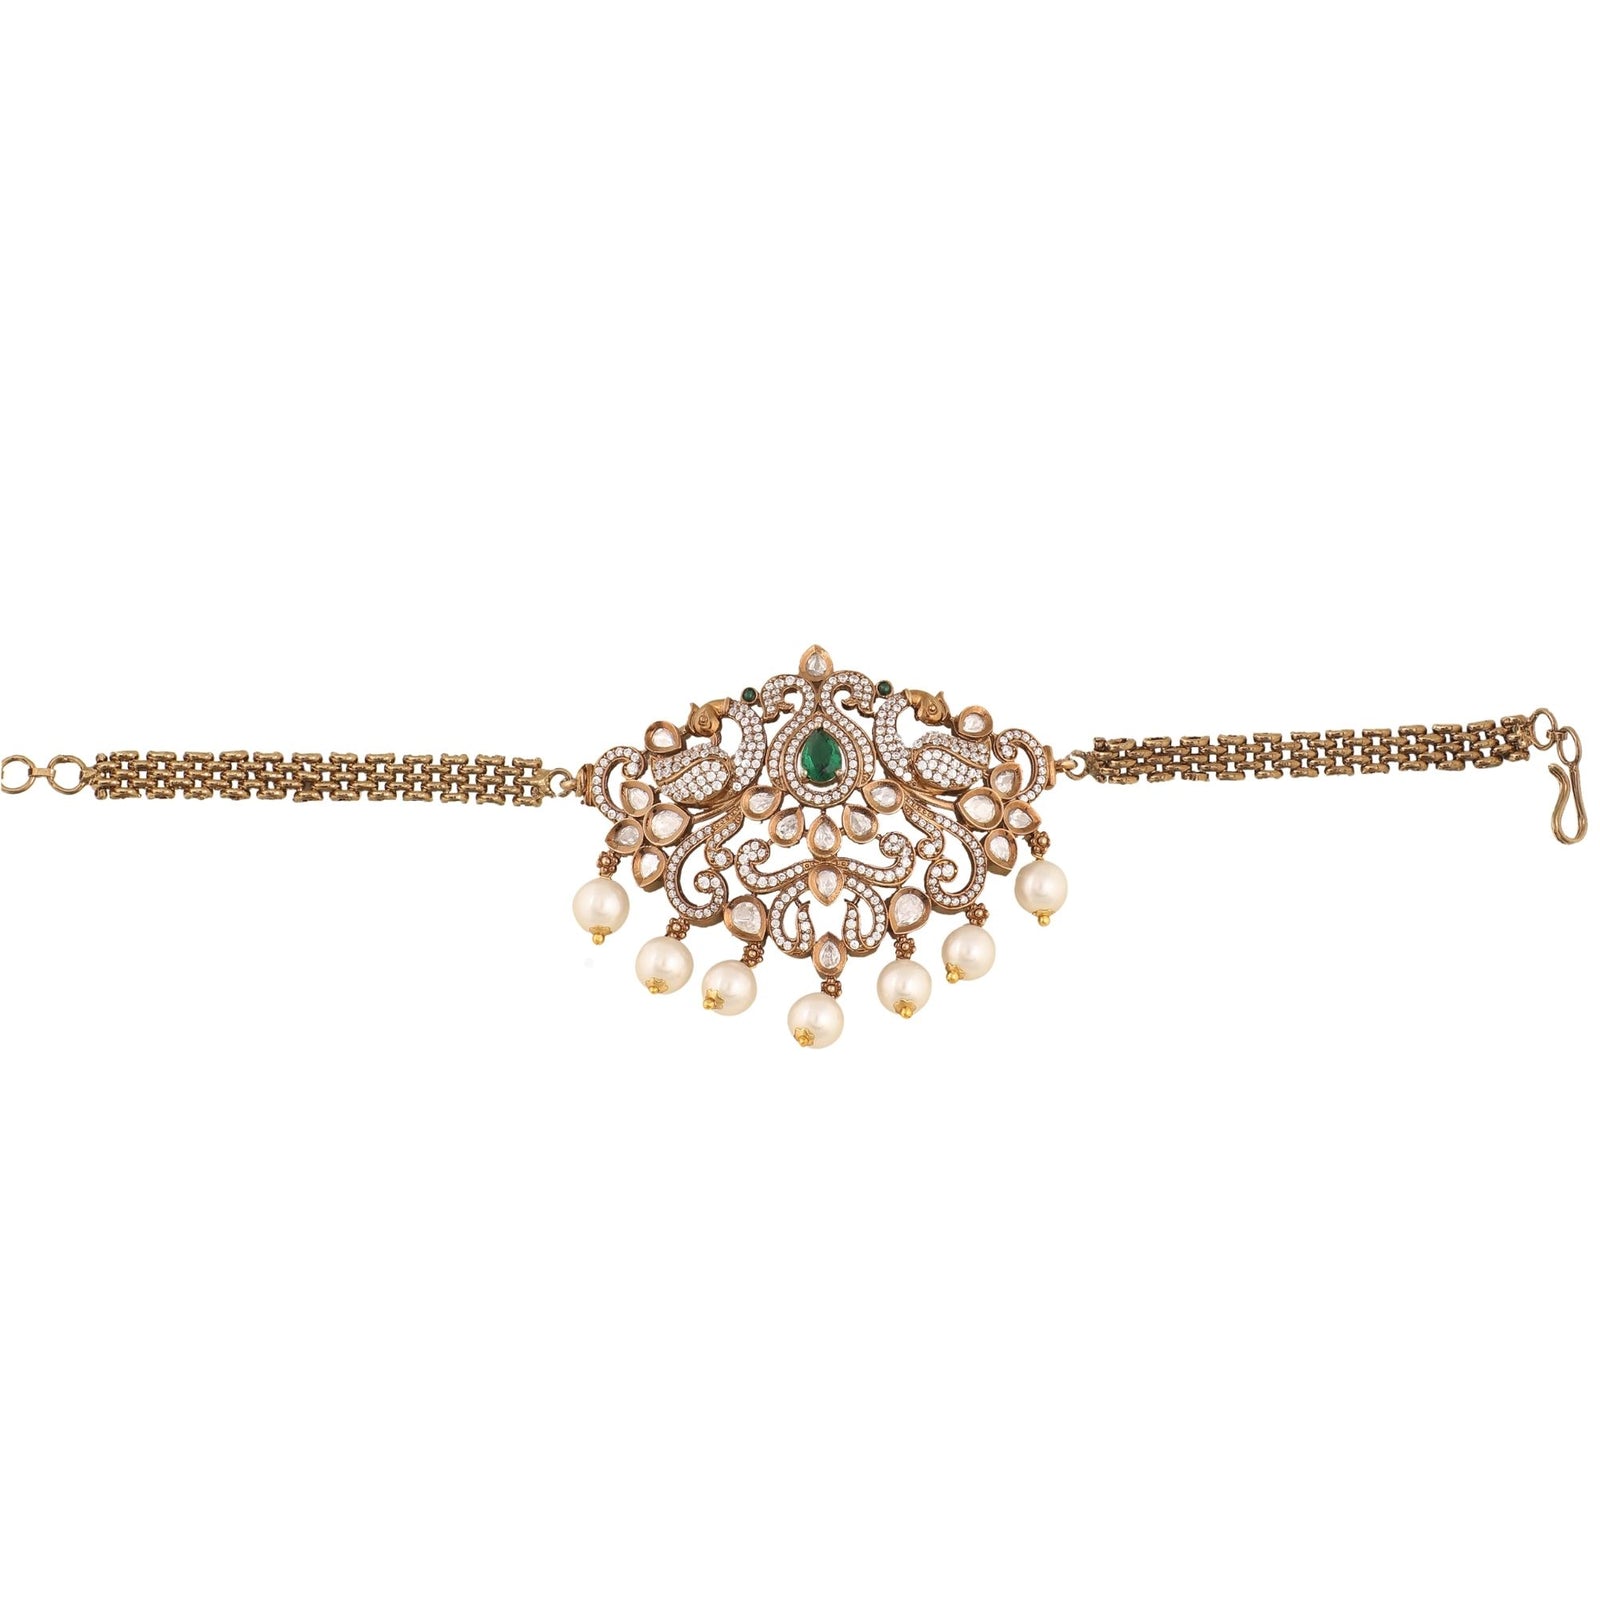 Buy Amaryllis Pearl Belt Chain for Women Online in India